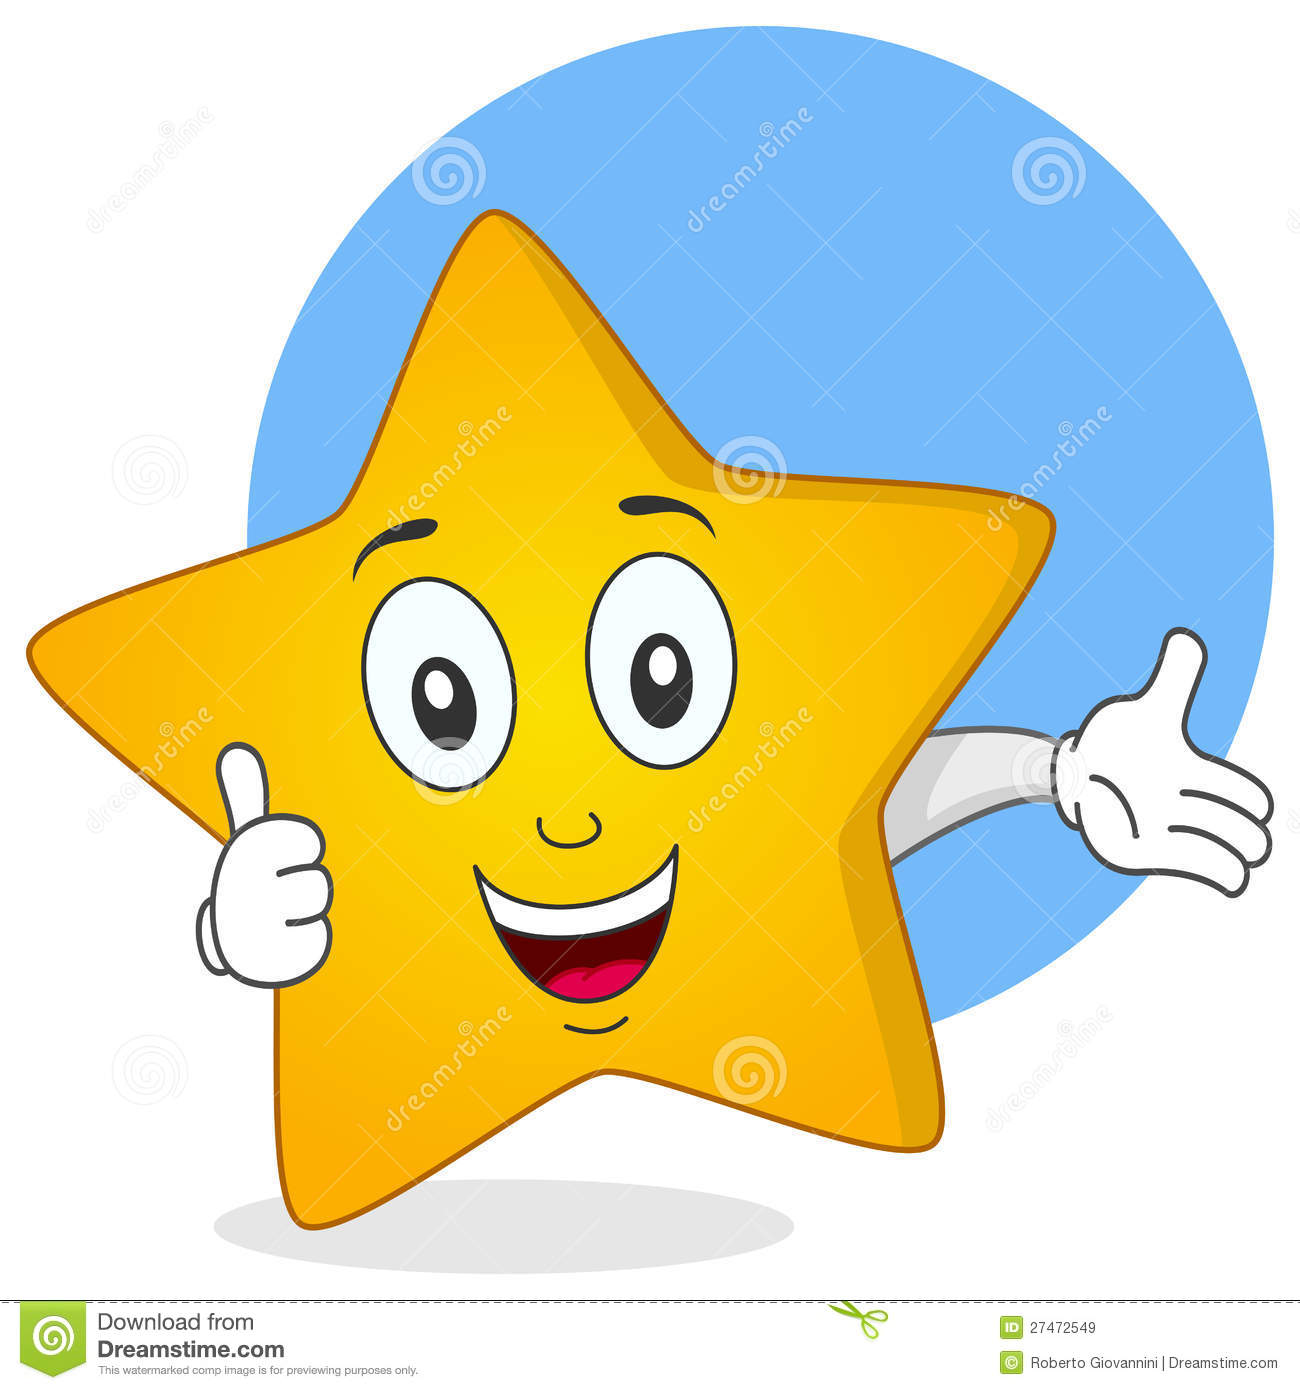 Yellow Star Thumbs Up Character Royalty Free Stock Images   Image